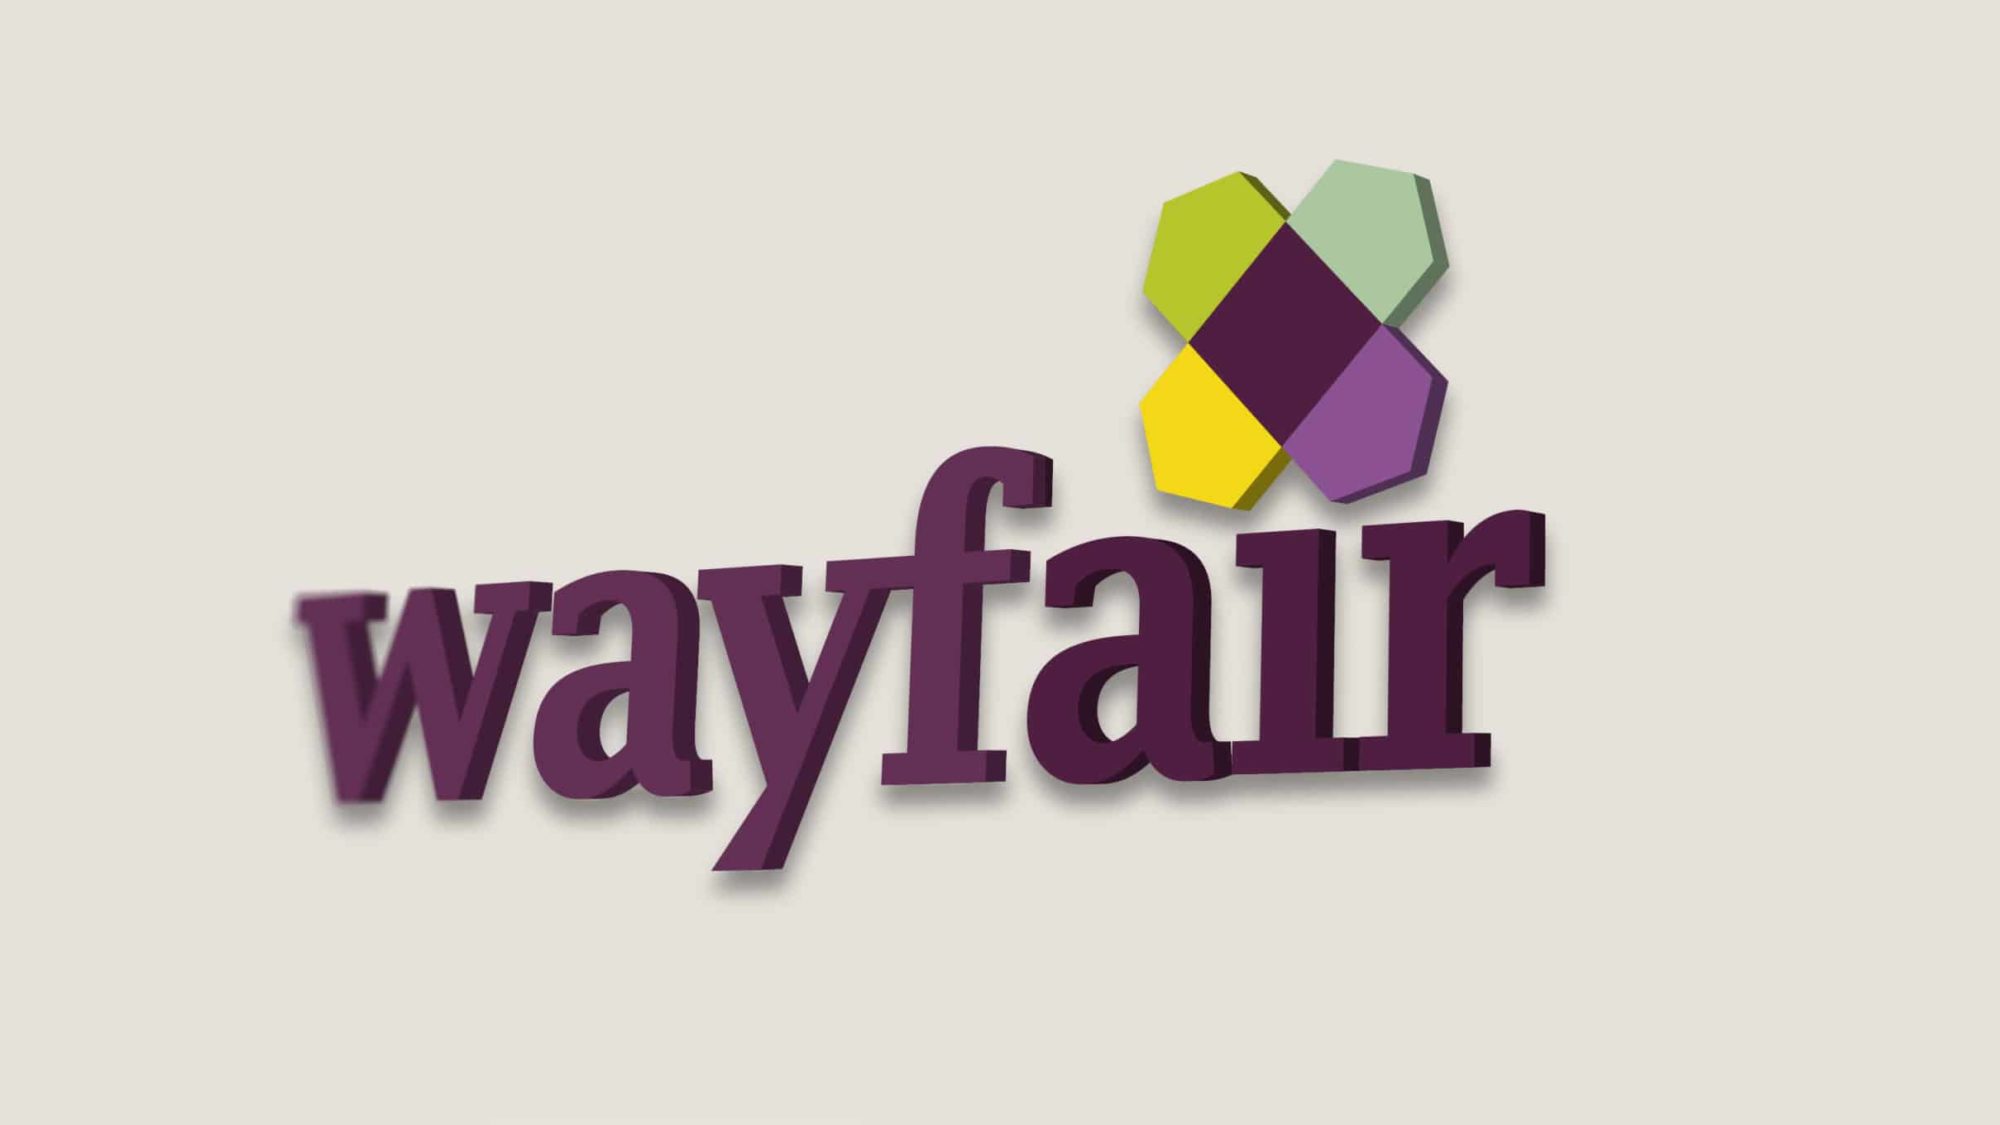 Wayfair secures funding for growth